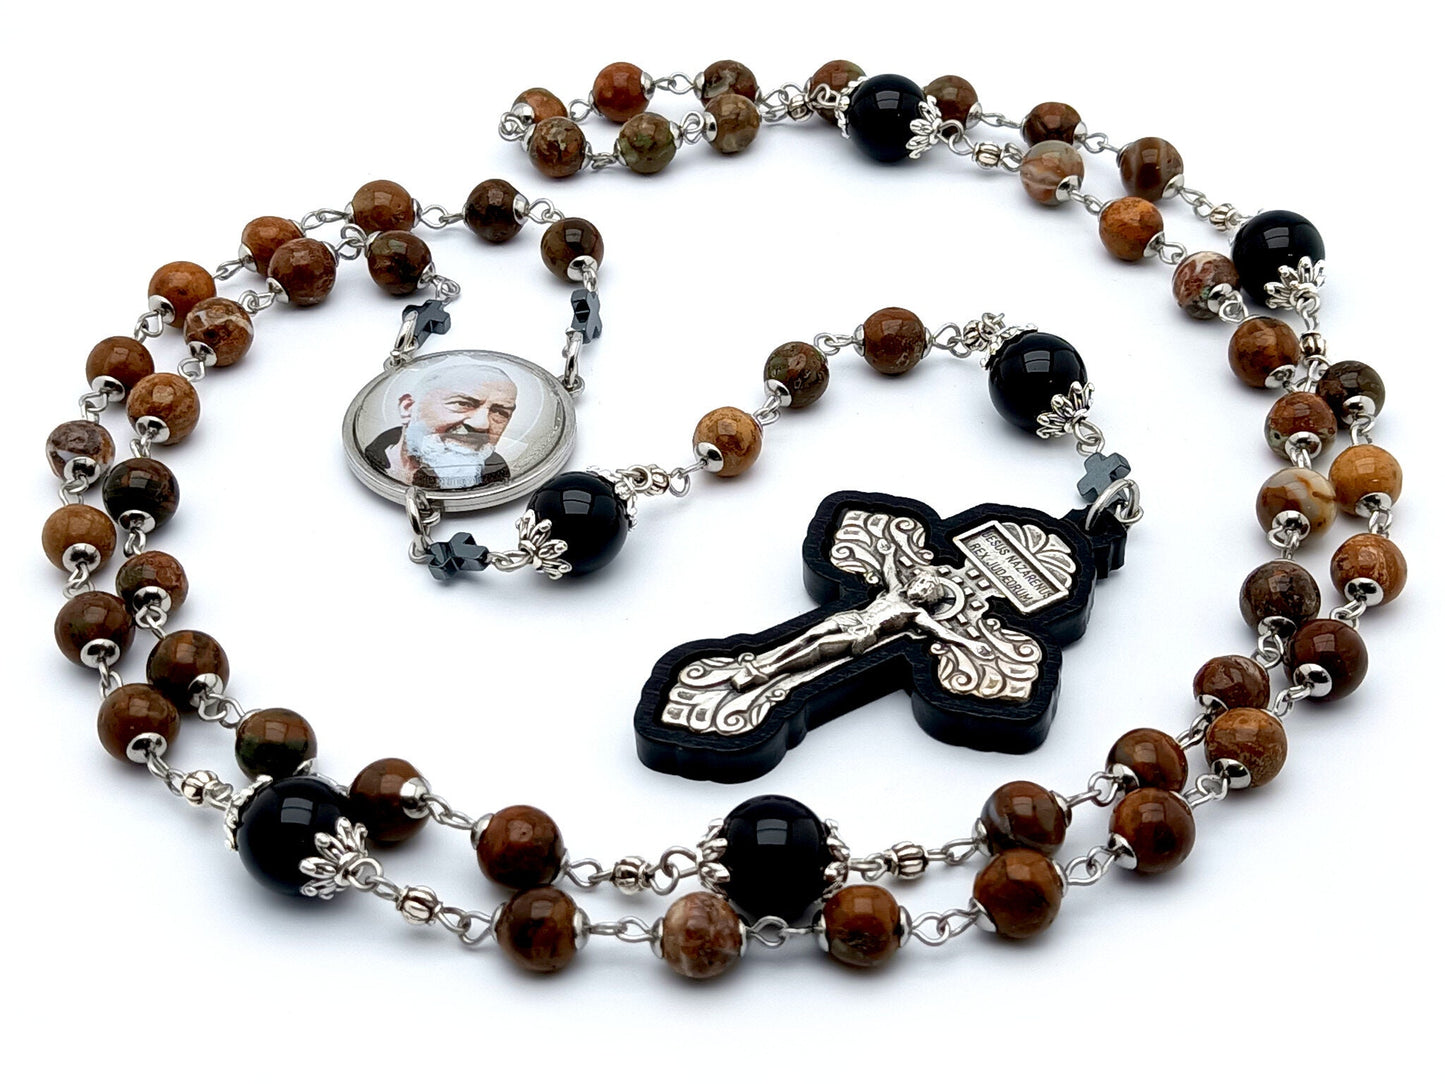 Saint Padre Pio unique rosary beads with nartural dark gemstone and onyx beads, Pardon crucifix embedded in dark wood and stainless steel picture centre medal.